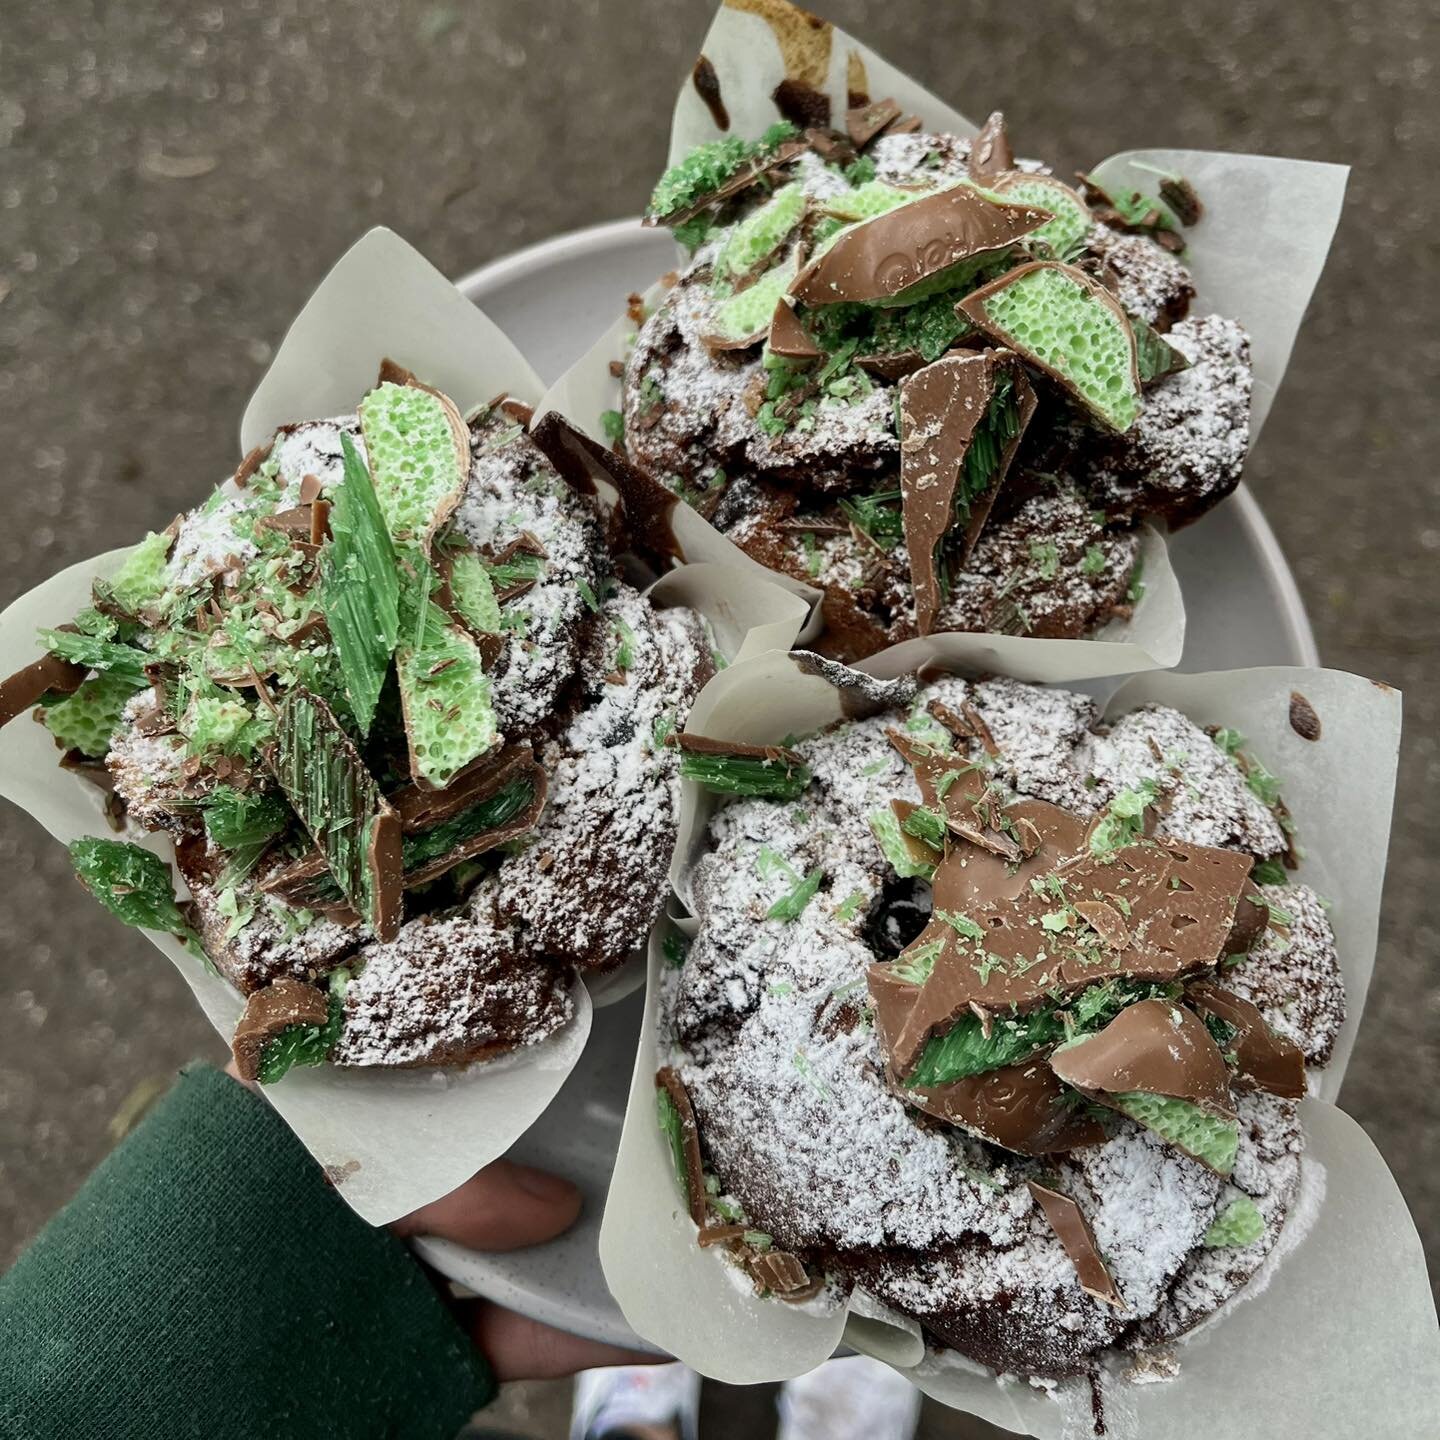 In case you missed out on the mint chocolate muffins last Sunday, don&rsquo;t worry, we have got you covered. 
Todays muffin choices are mint chocolate muffins with a rich mint ganache centre, mixed berry and dark chocolate, and blueberry cinnamon.
W